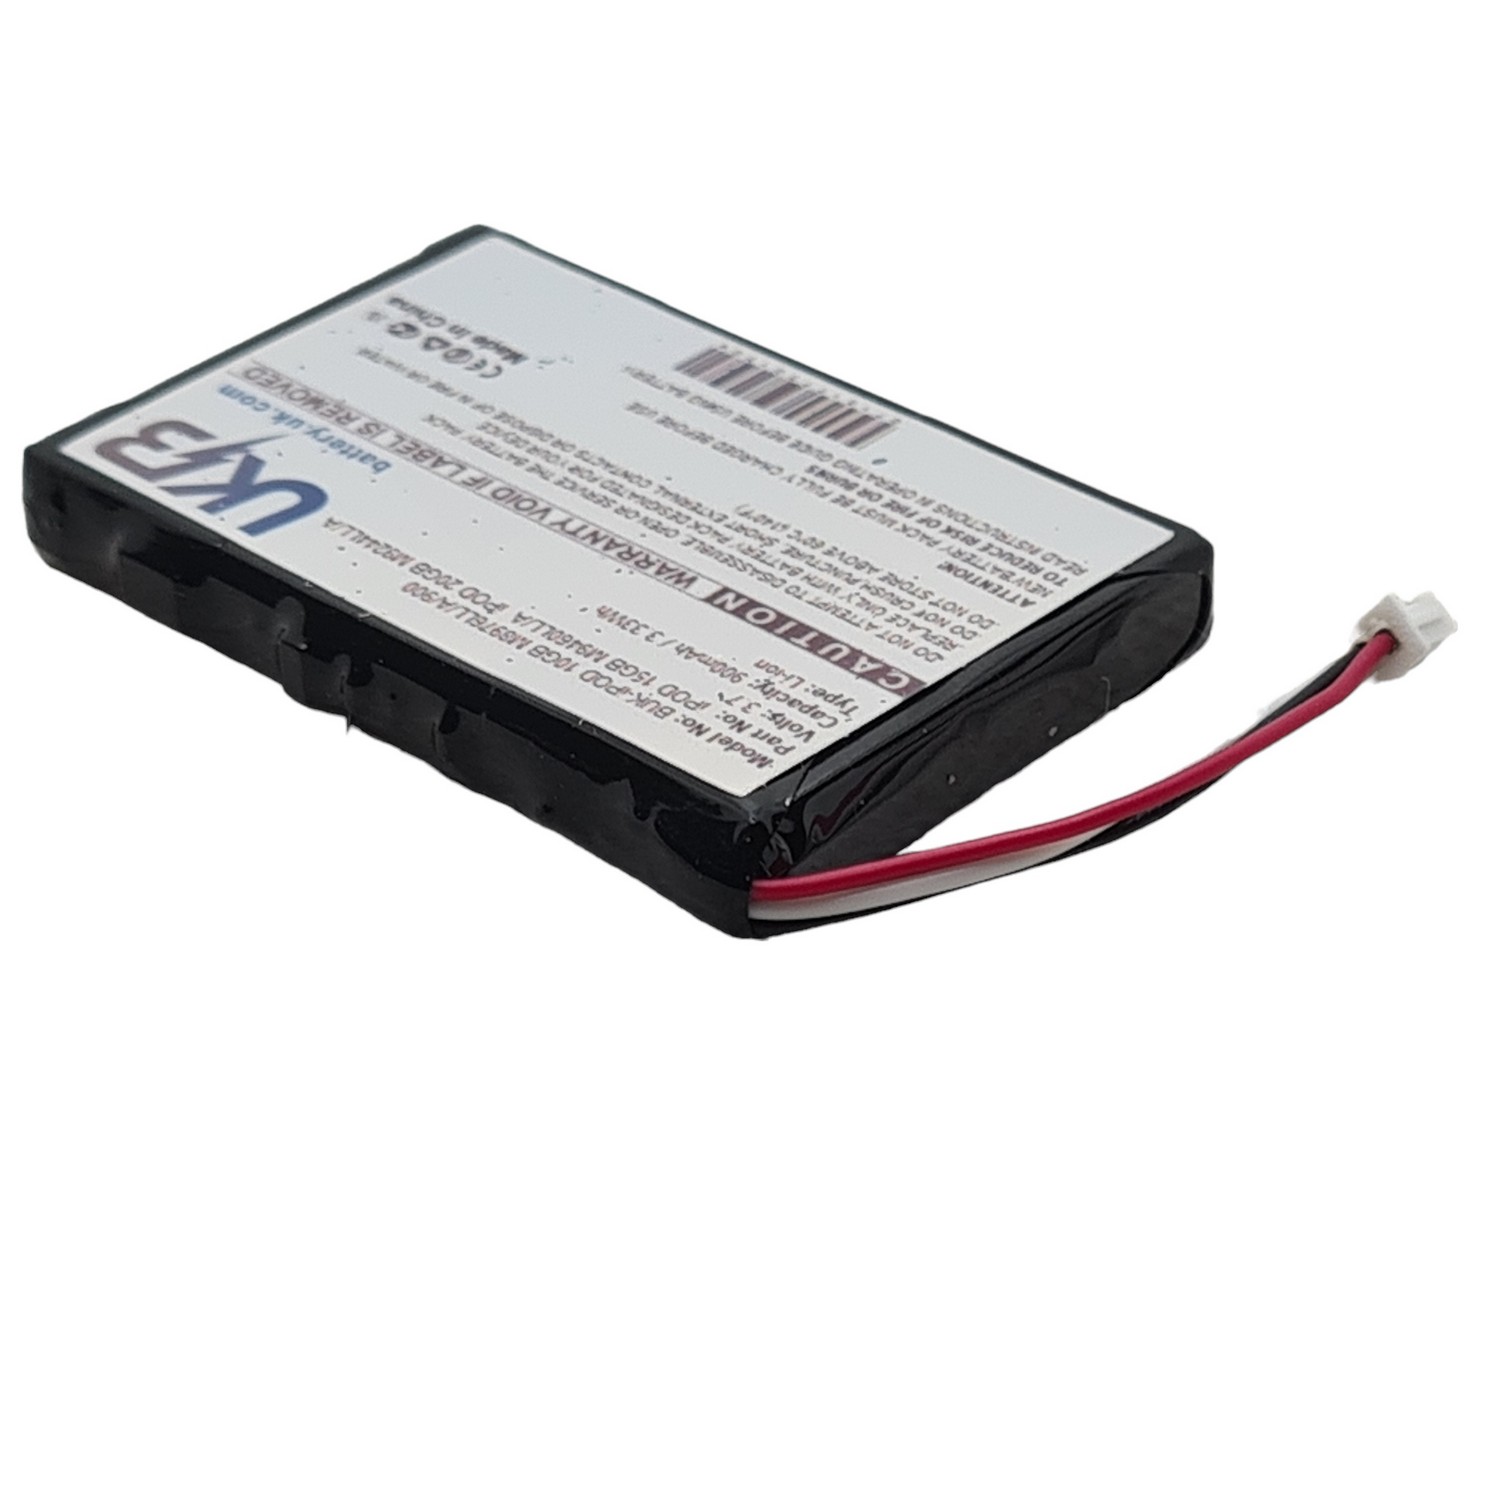 APPLE iPod 10GBM8976LL-A Compatible Replacement Battery